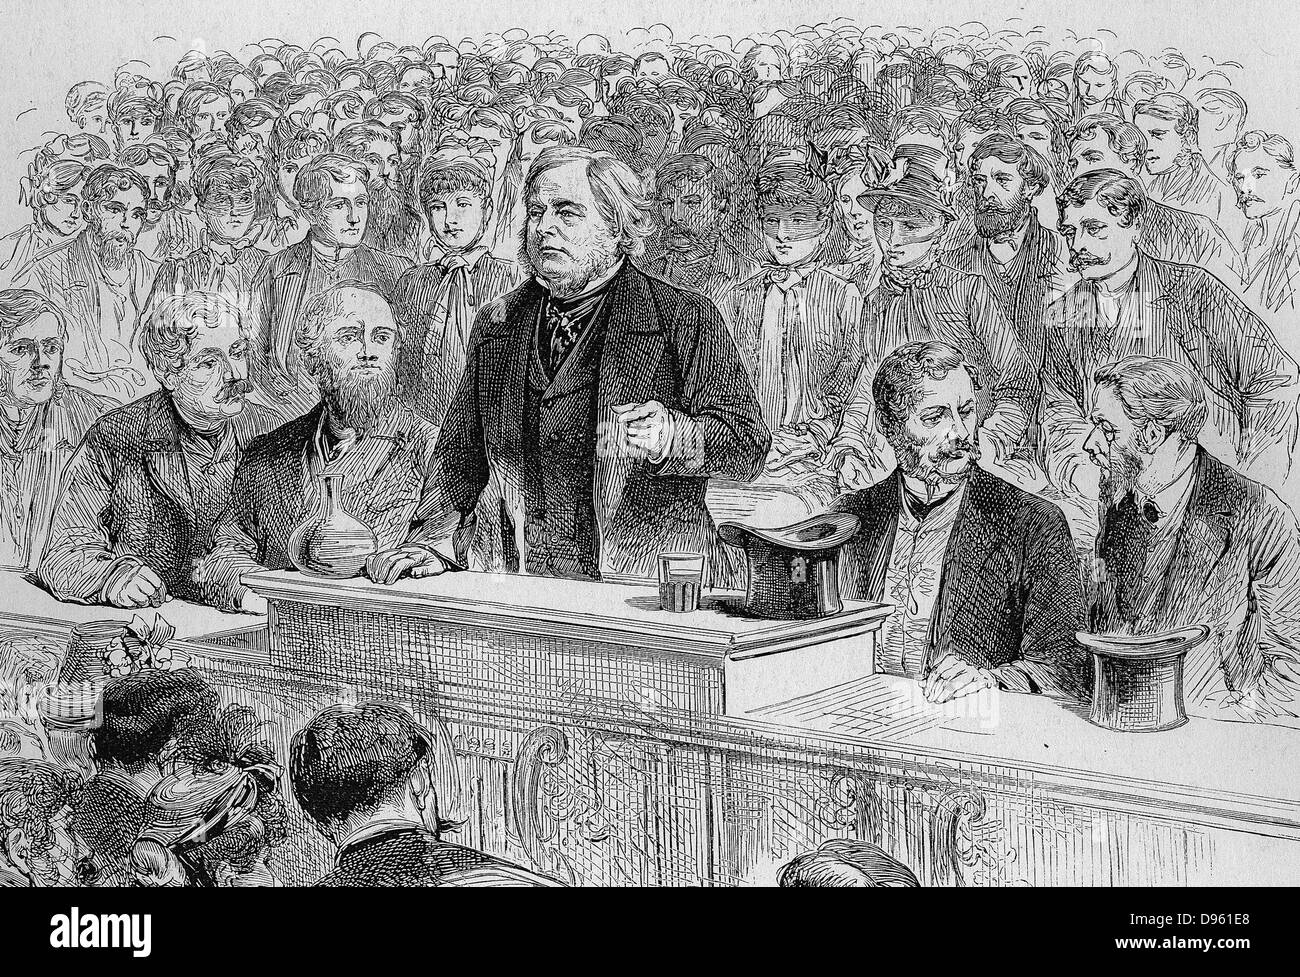 John Bright (1811-1889) English Quaker Radical statesman. Advocate of the Anti-Corn Law League and of Free Trade.  Bright speaking at an election meeting at Birmingham, November 1885. Engraving. Stock Photo